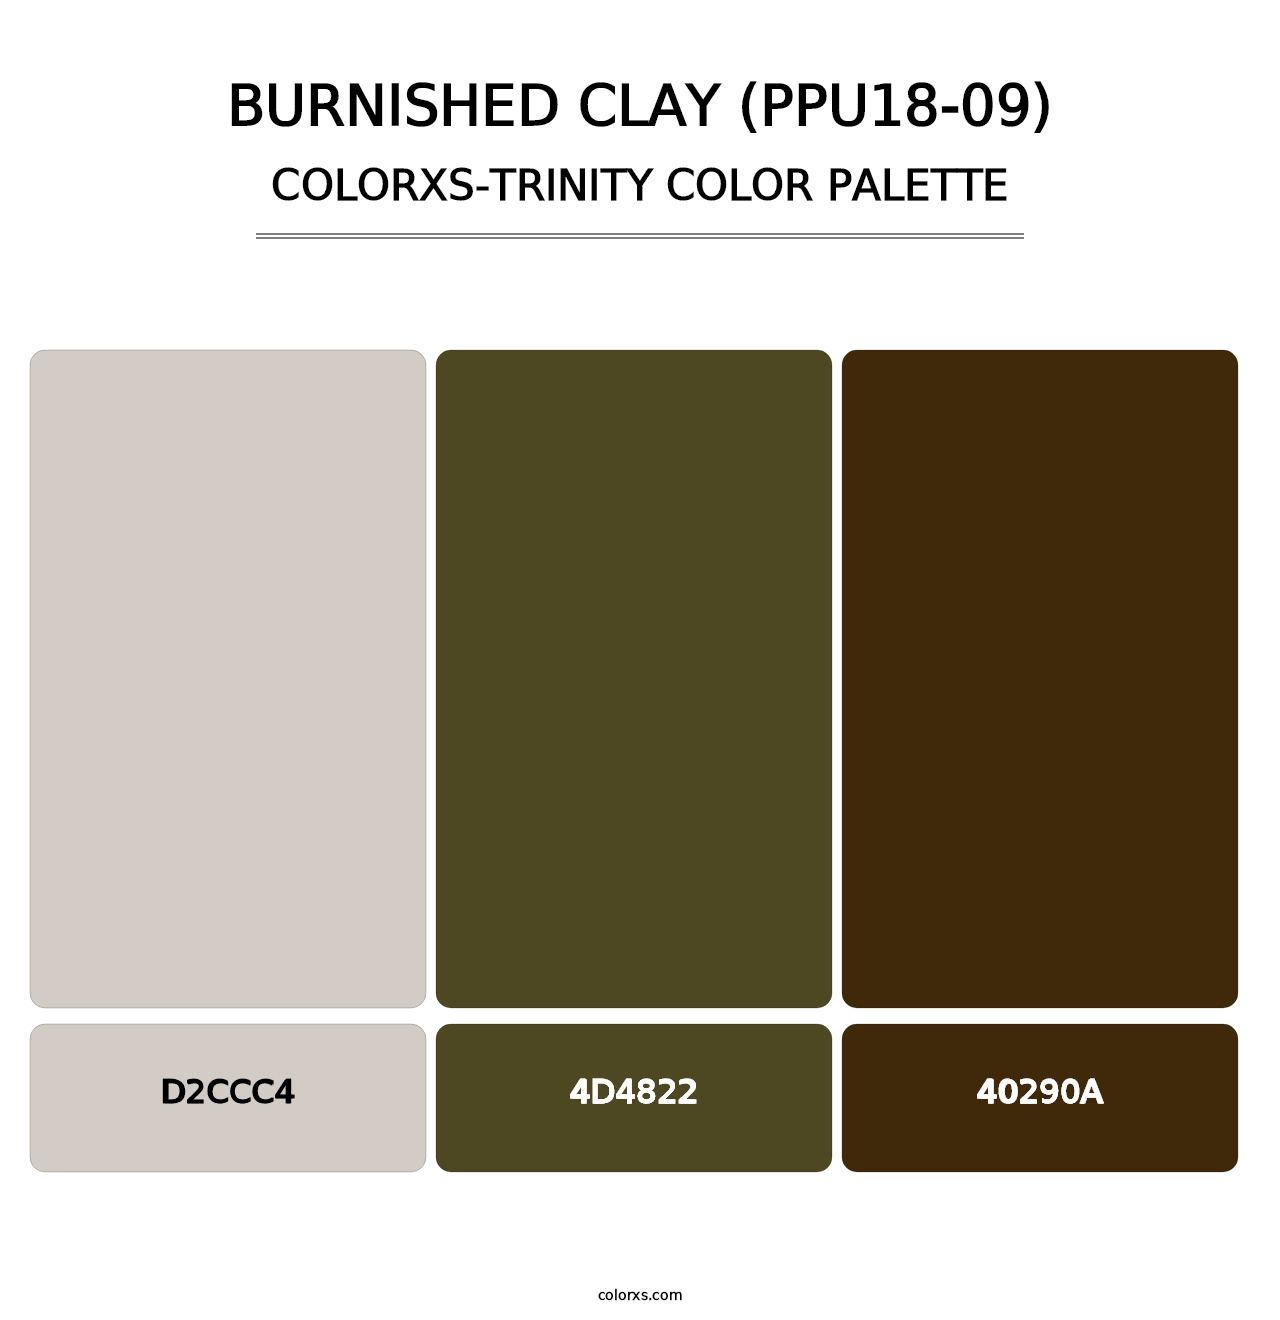 Burnished Clay (PPU18-09) - Colorxs Trinity Palette